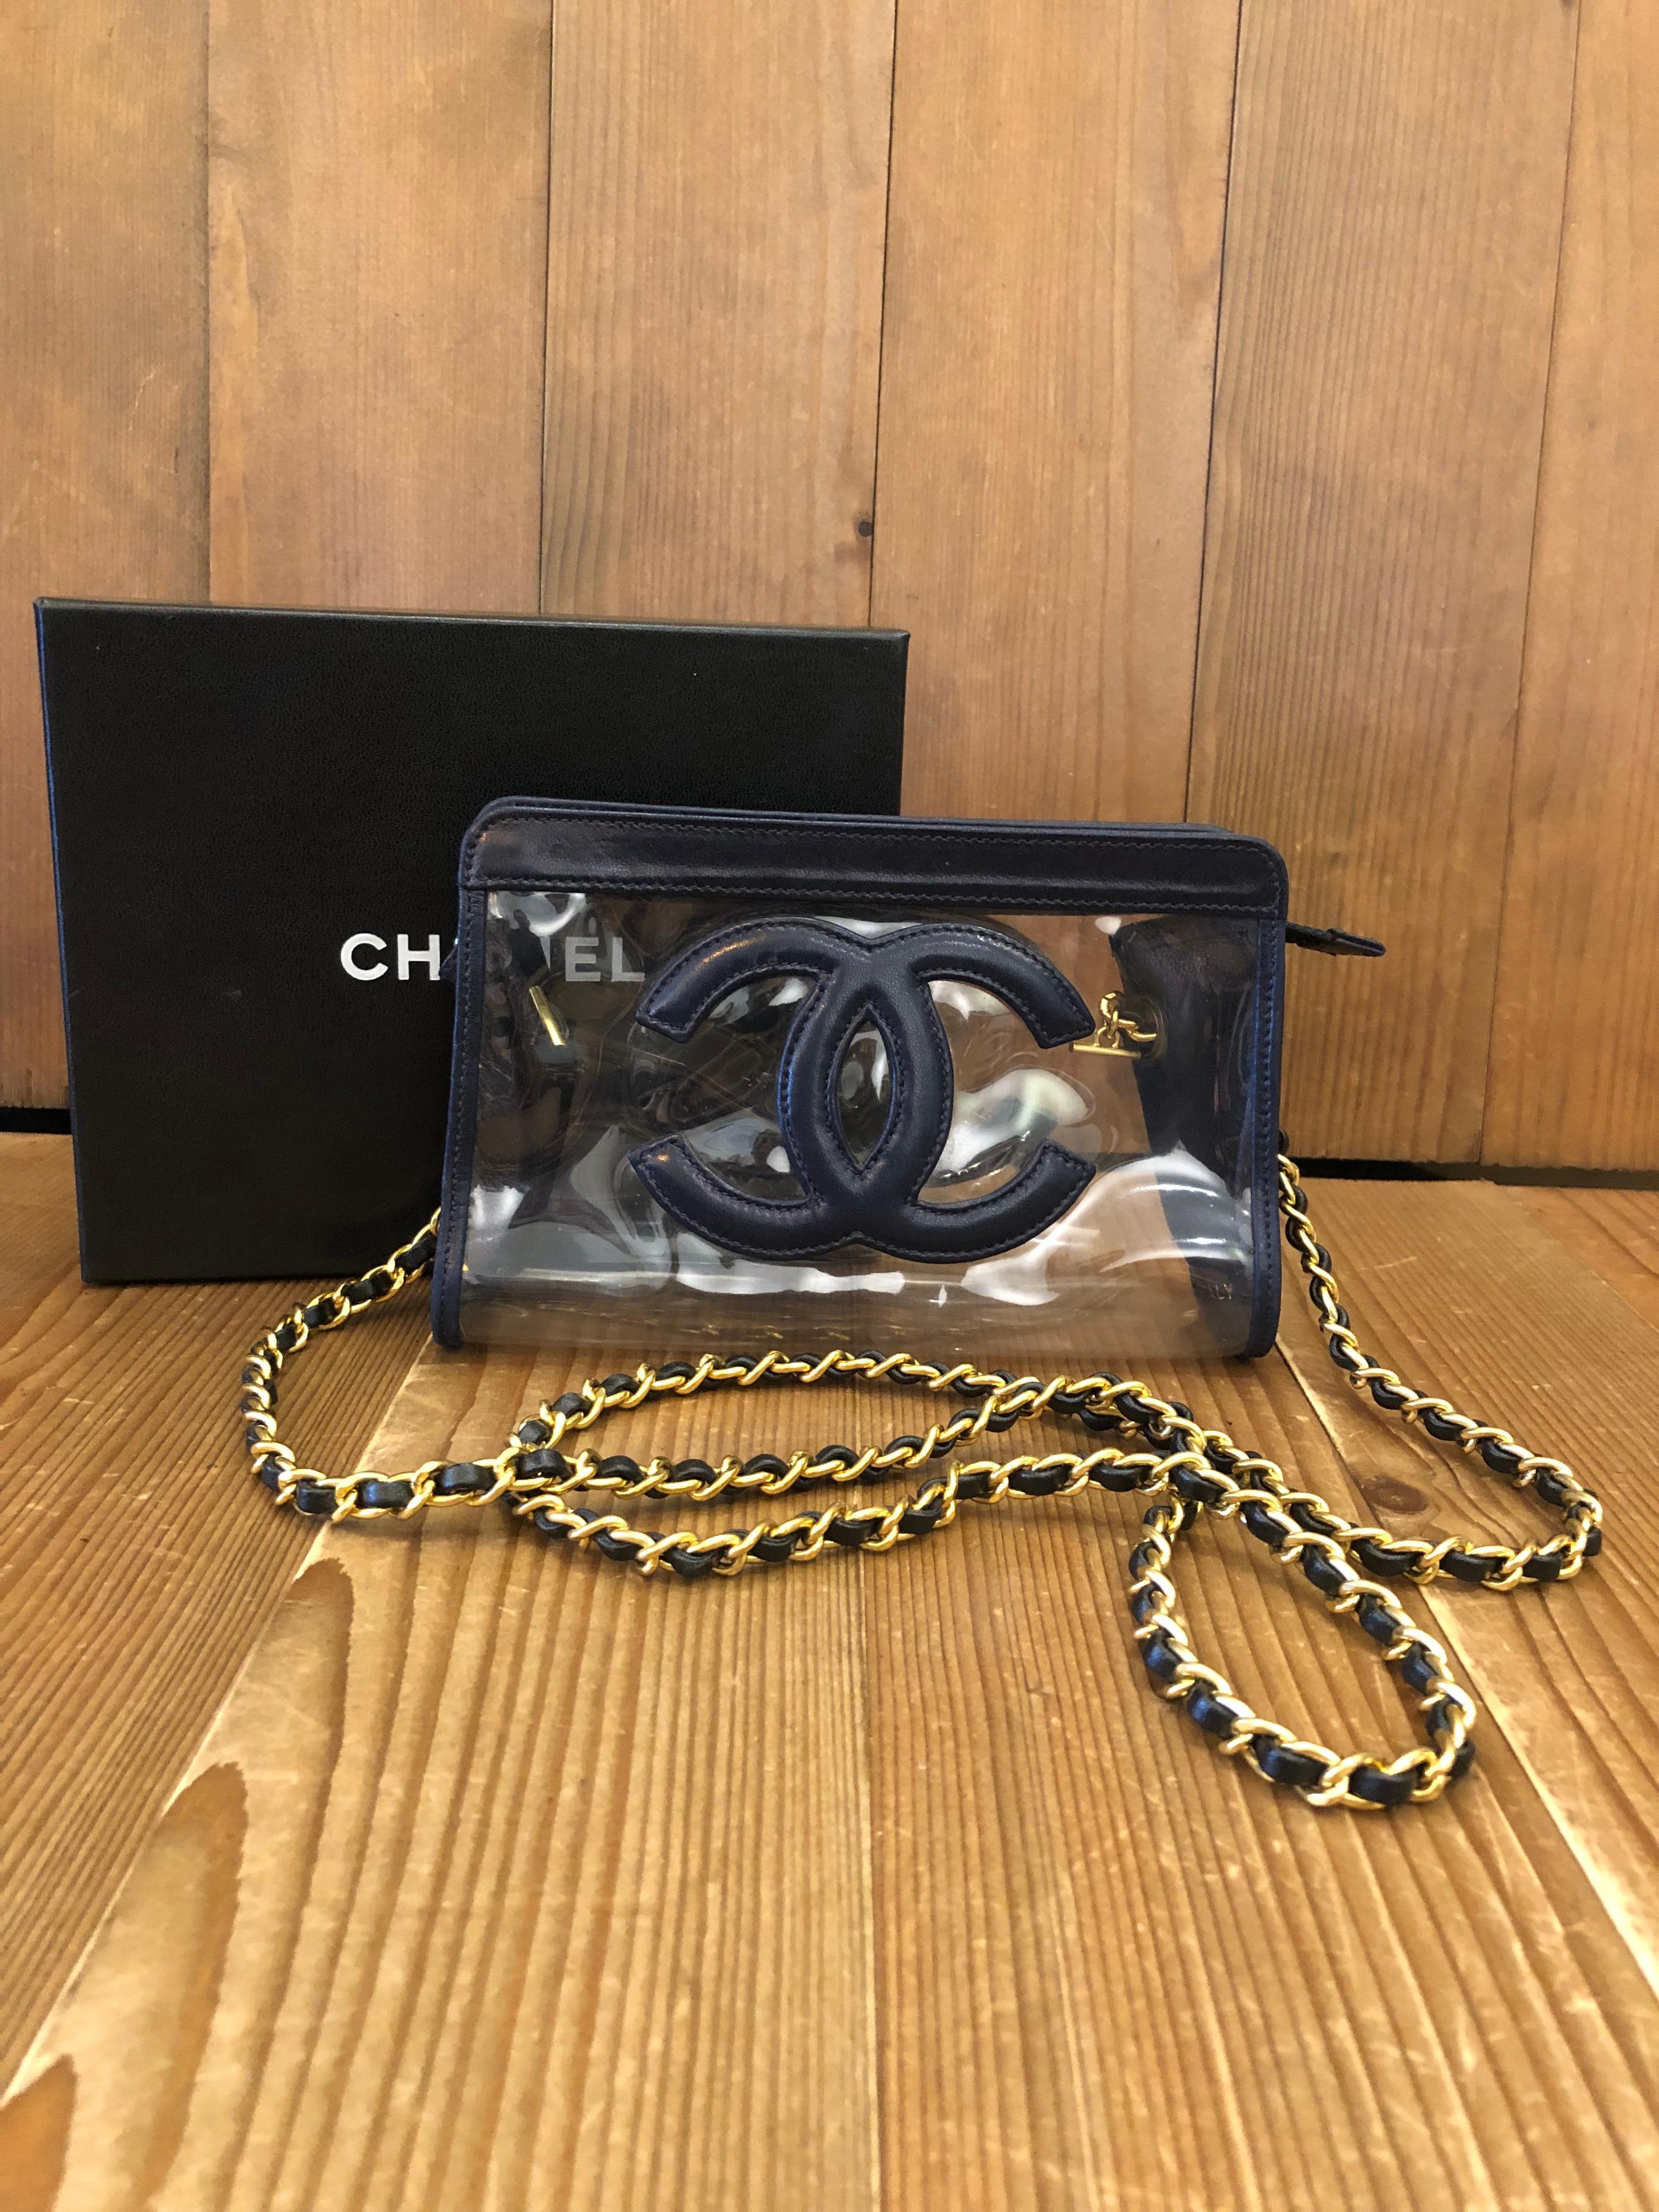 This vintage CHANEL pouch bag is crafted of lambskin leather in navy and transparent vinyl. Top zipper closure opens to an unlined interior. 3xxxxxx series (1994 - 1996) made in Italy. Measures approximately 7 x 4 x 2 inches. Third party eyelets are